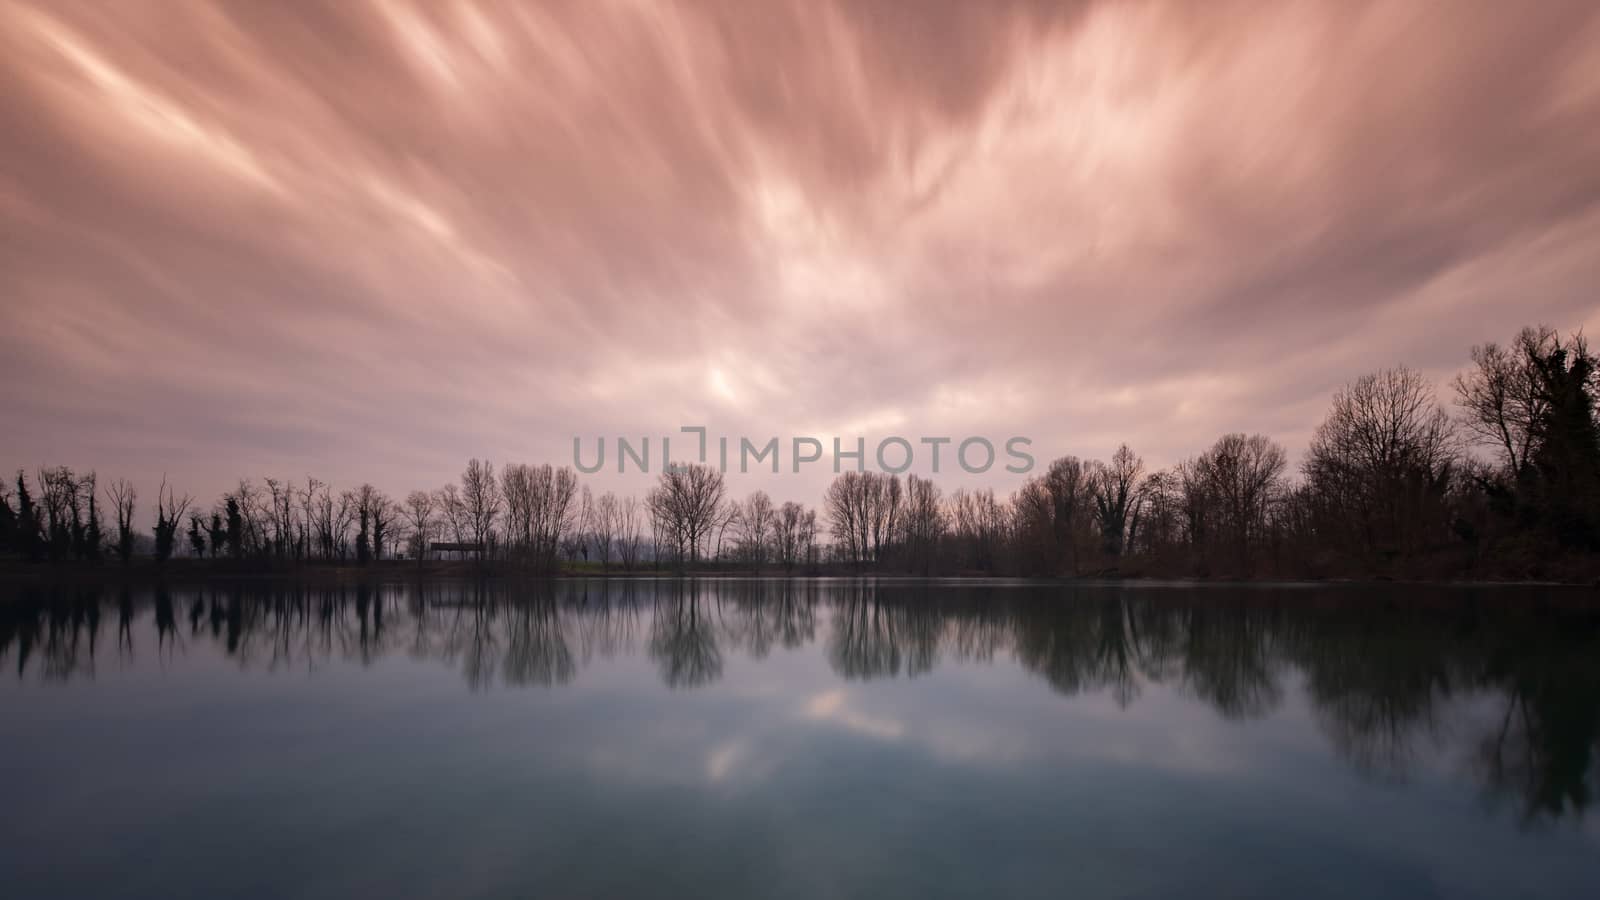 A red and cloudy sky reflected in the water of a lake at sunset  by brambillasimone